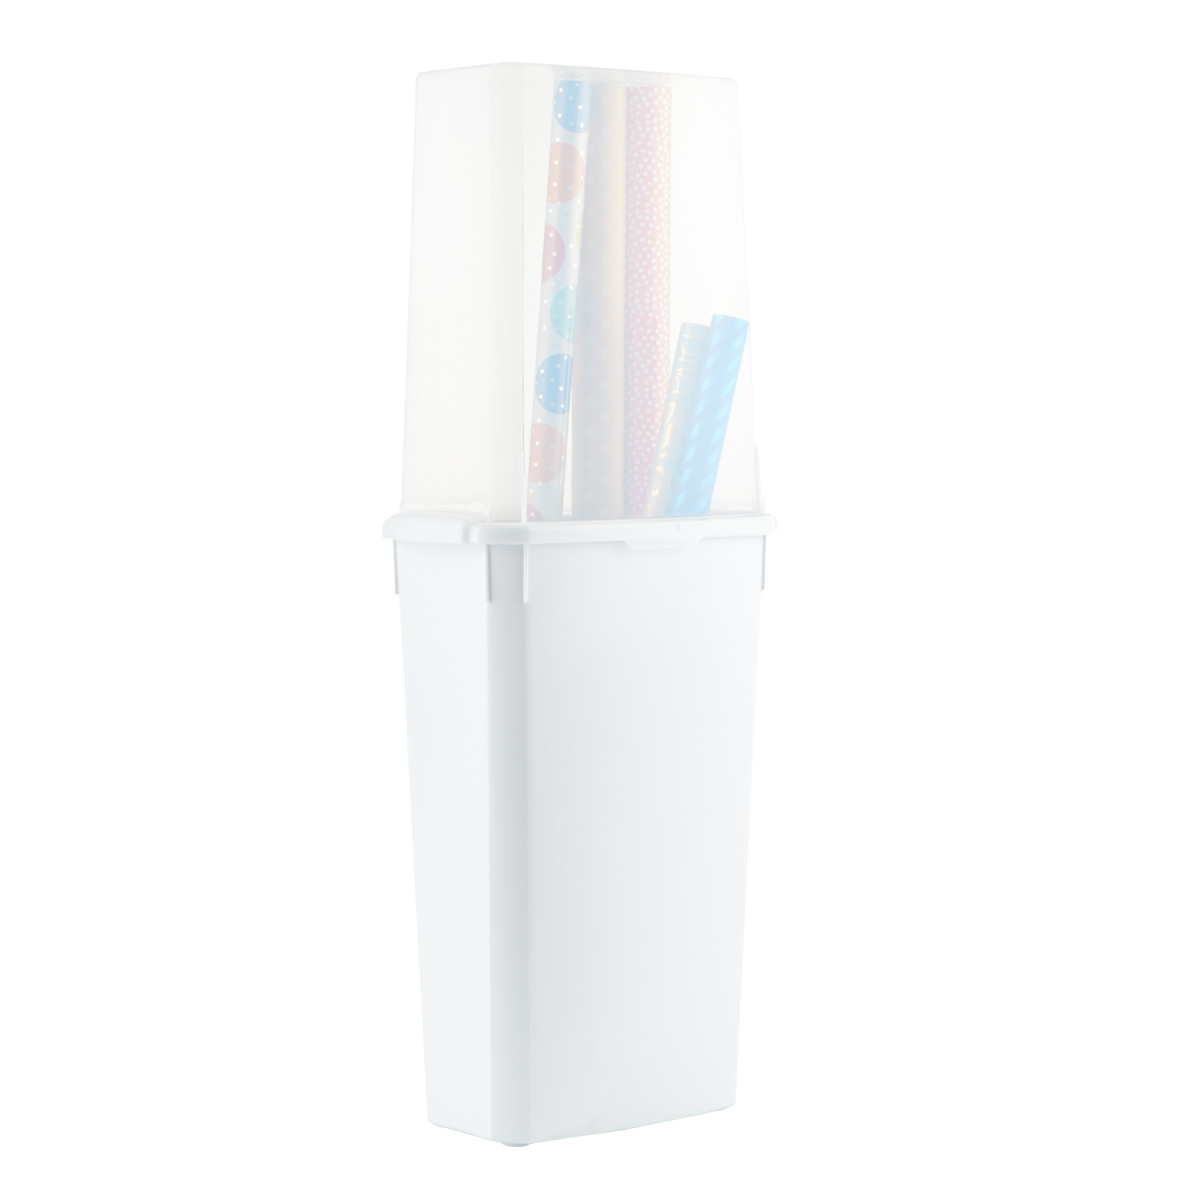 IRIS Wrapping Paper Storage Bin 40-inch (4 Pack) - Bed Bath & Beyond -  32363956